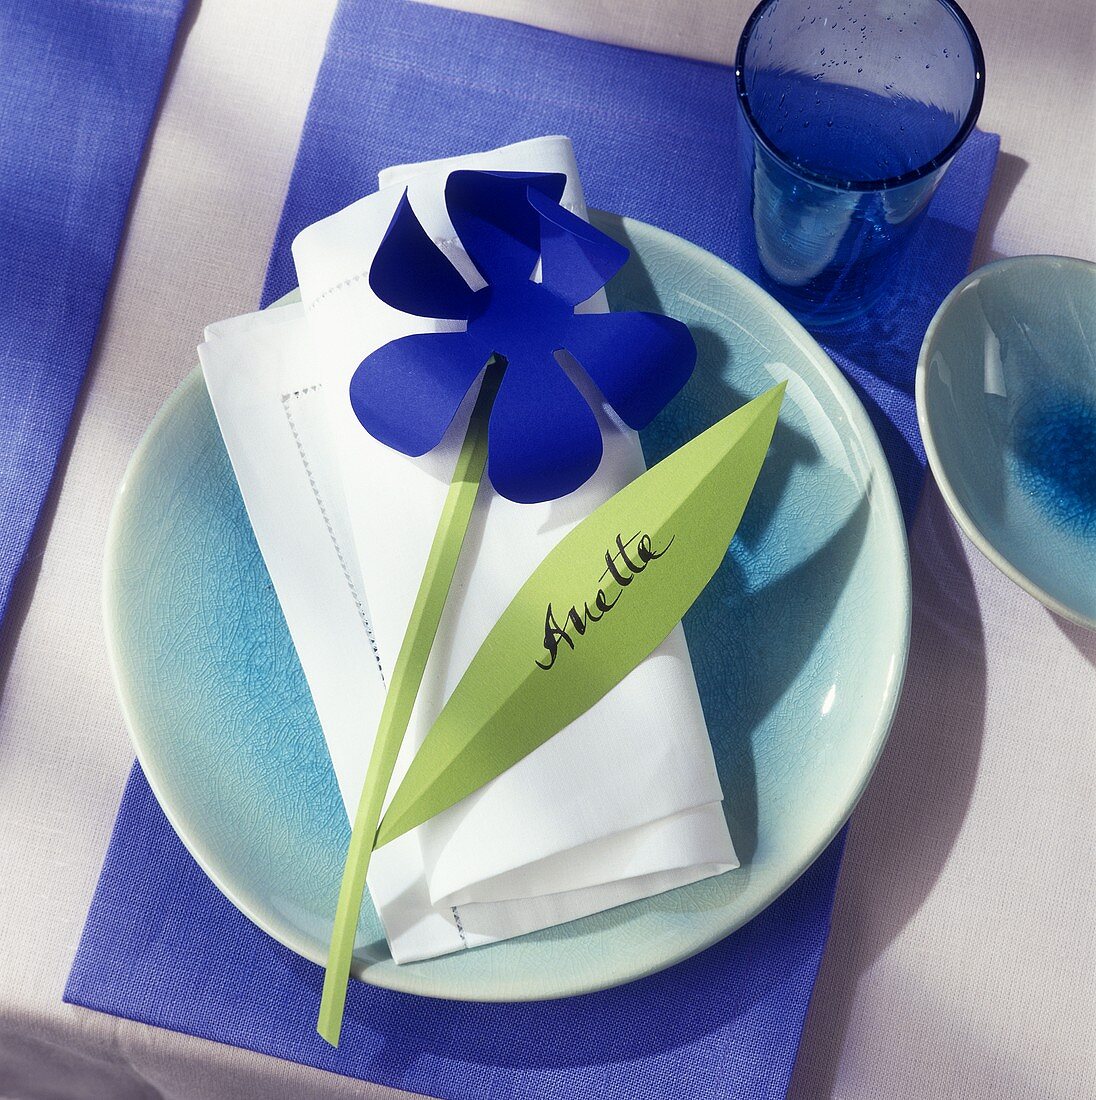 Table setting with windmill as place card